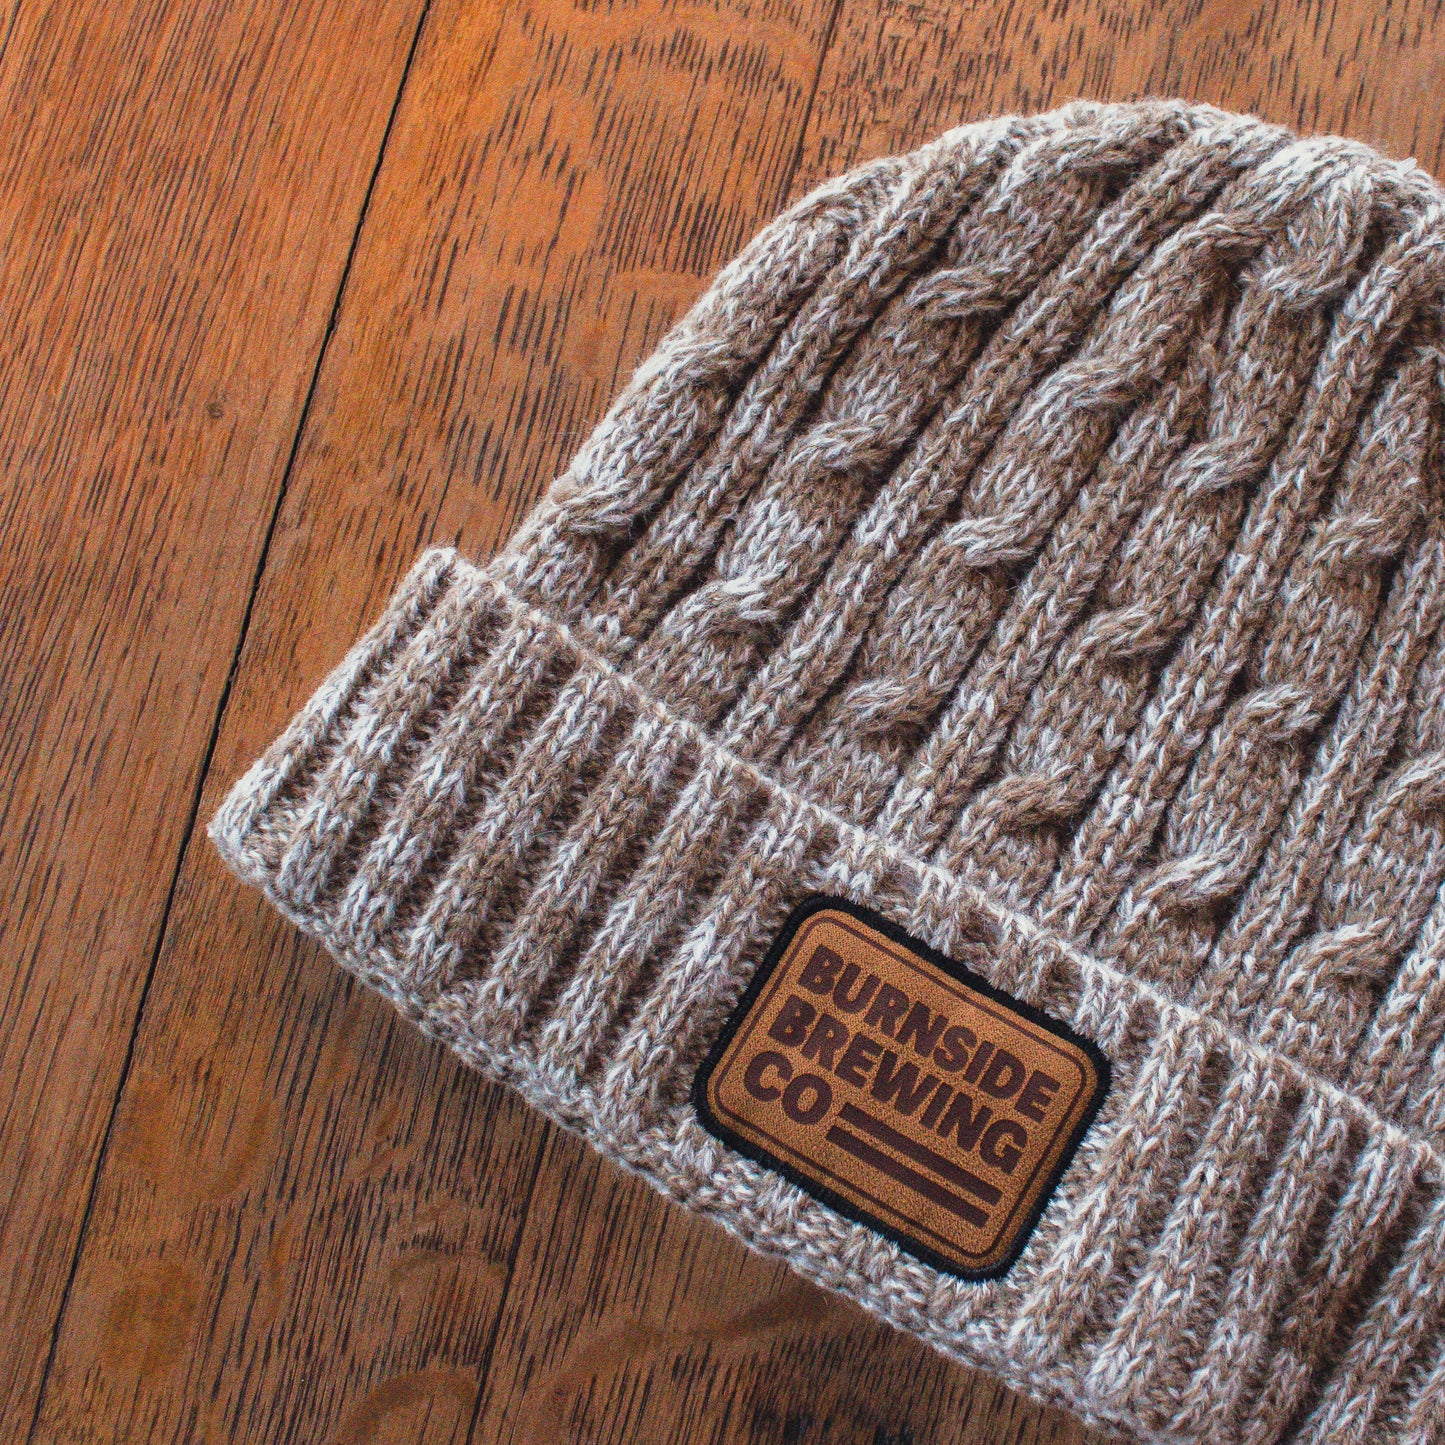 Leather Patch Toque